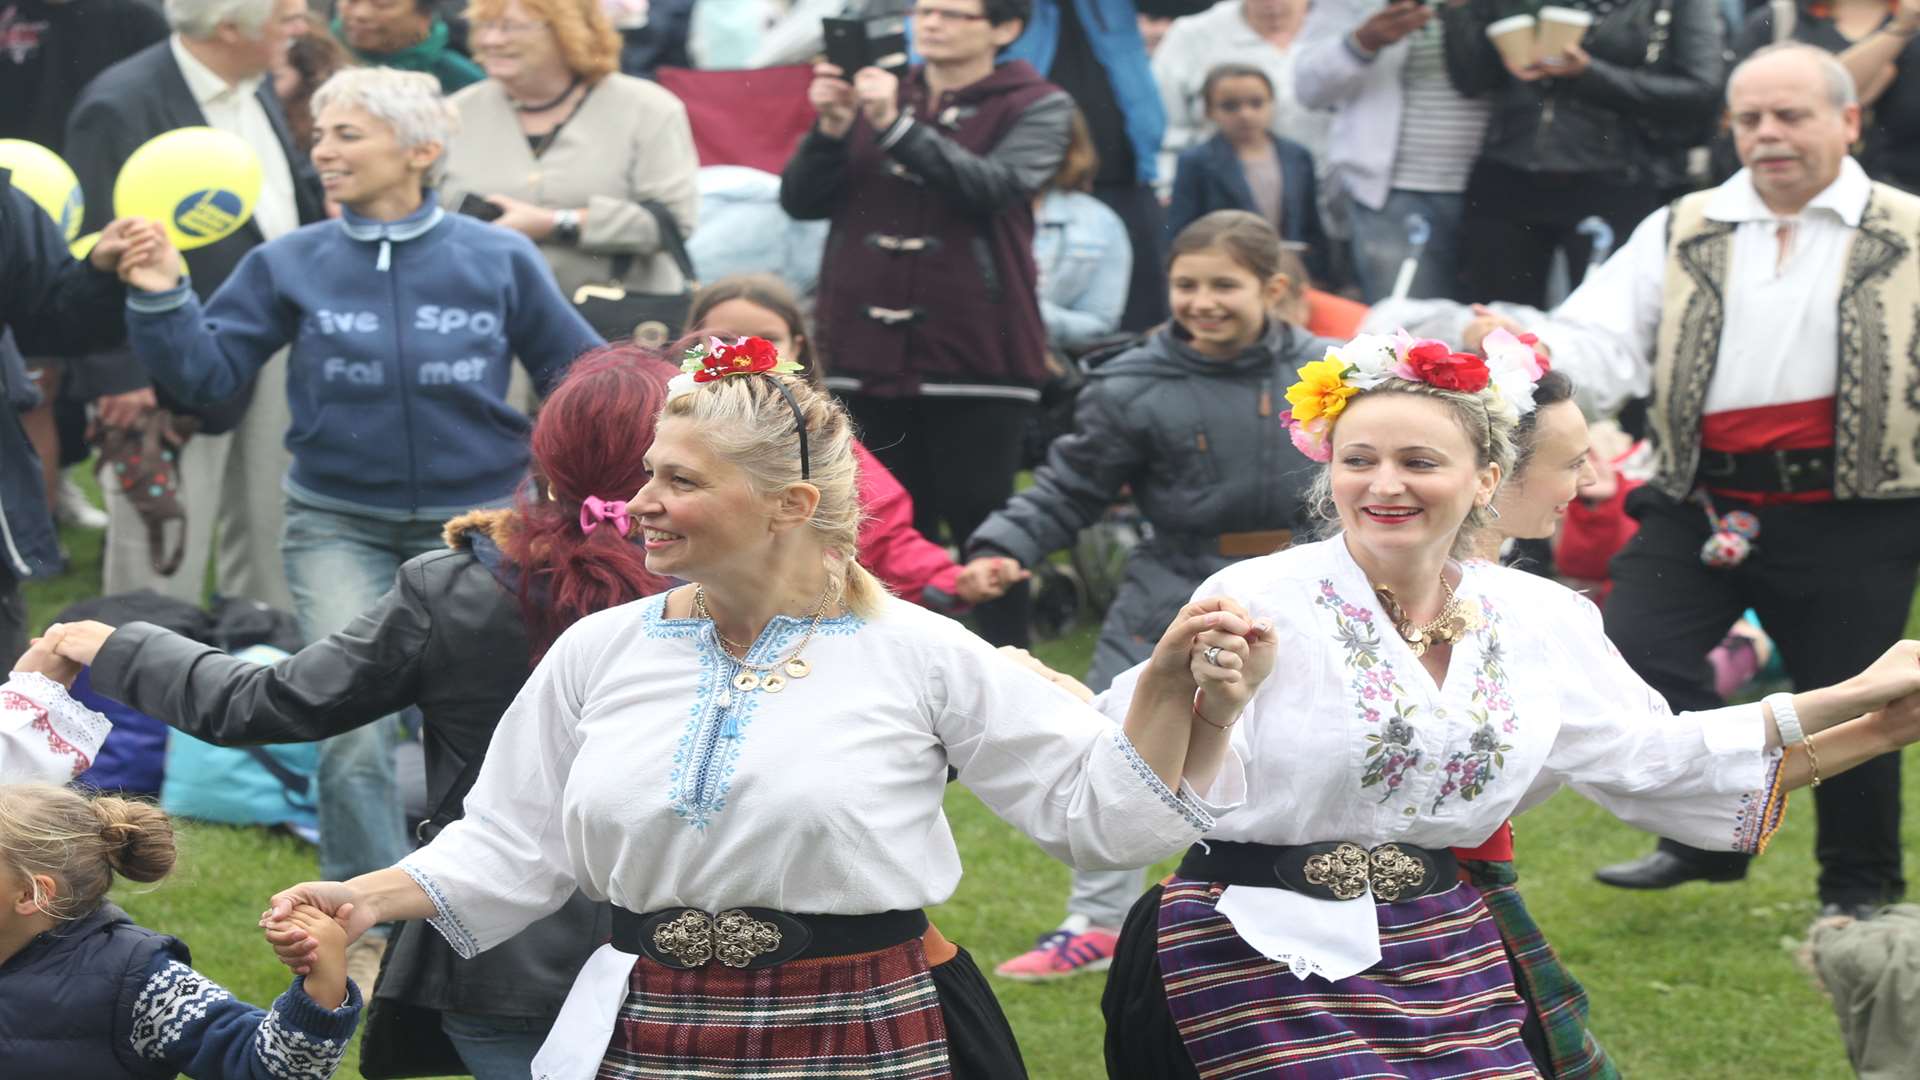 Kitka, a Bulgarian Dance Group perform amongst the public at Maidstone Mela at Mote Park in Maidstone. Picture: John Westhrop.